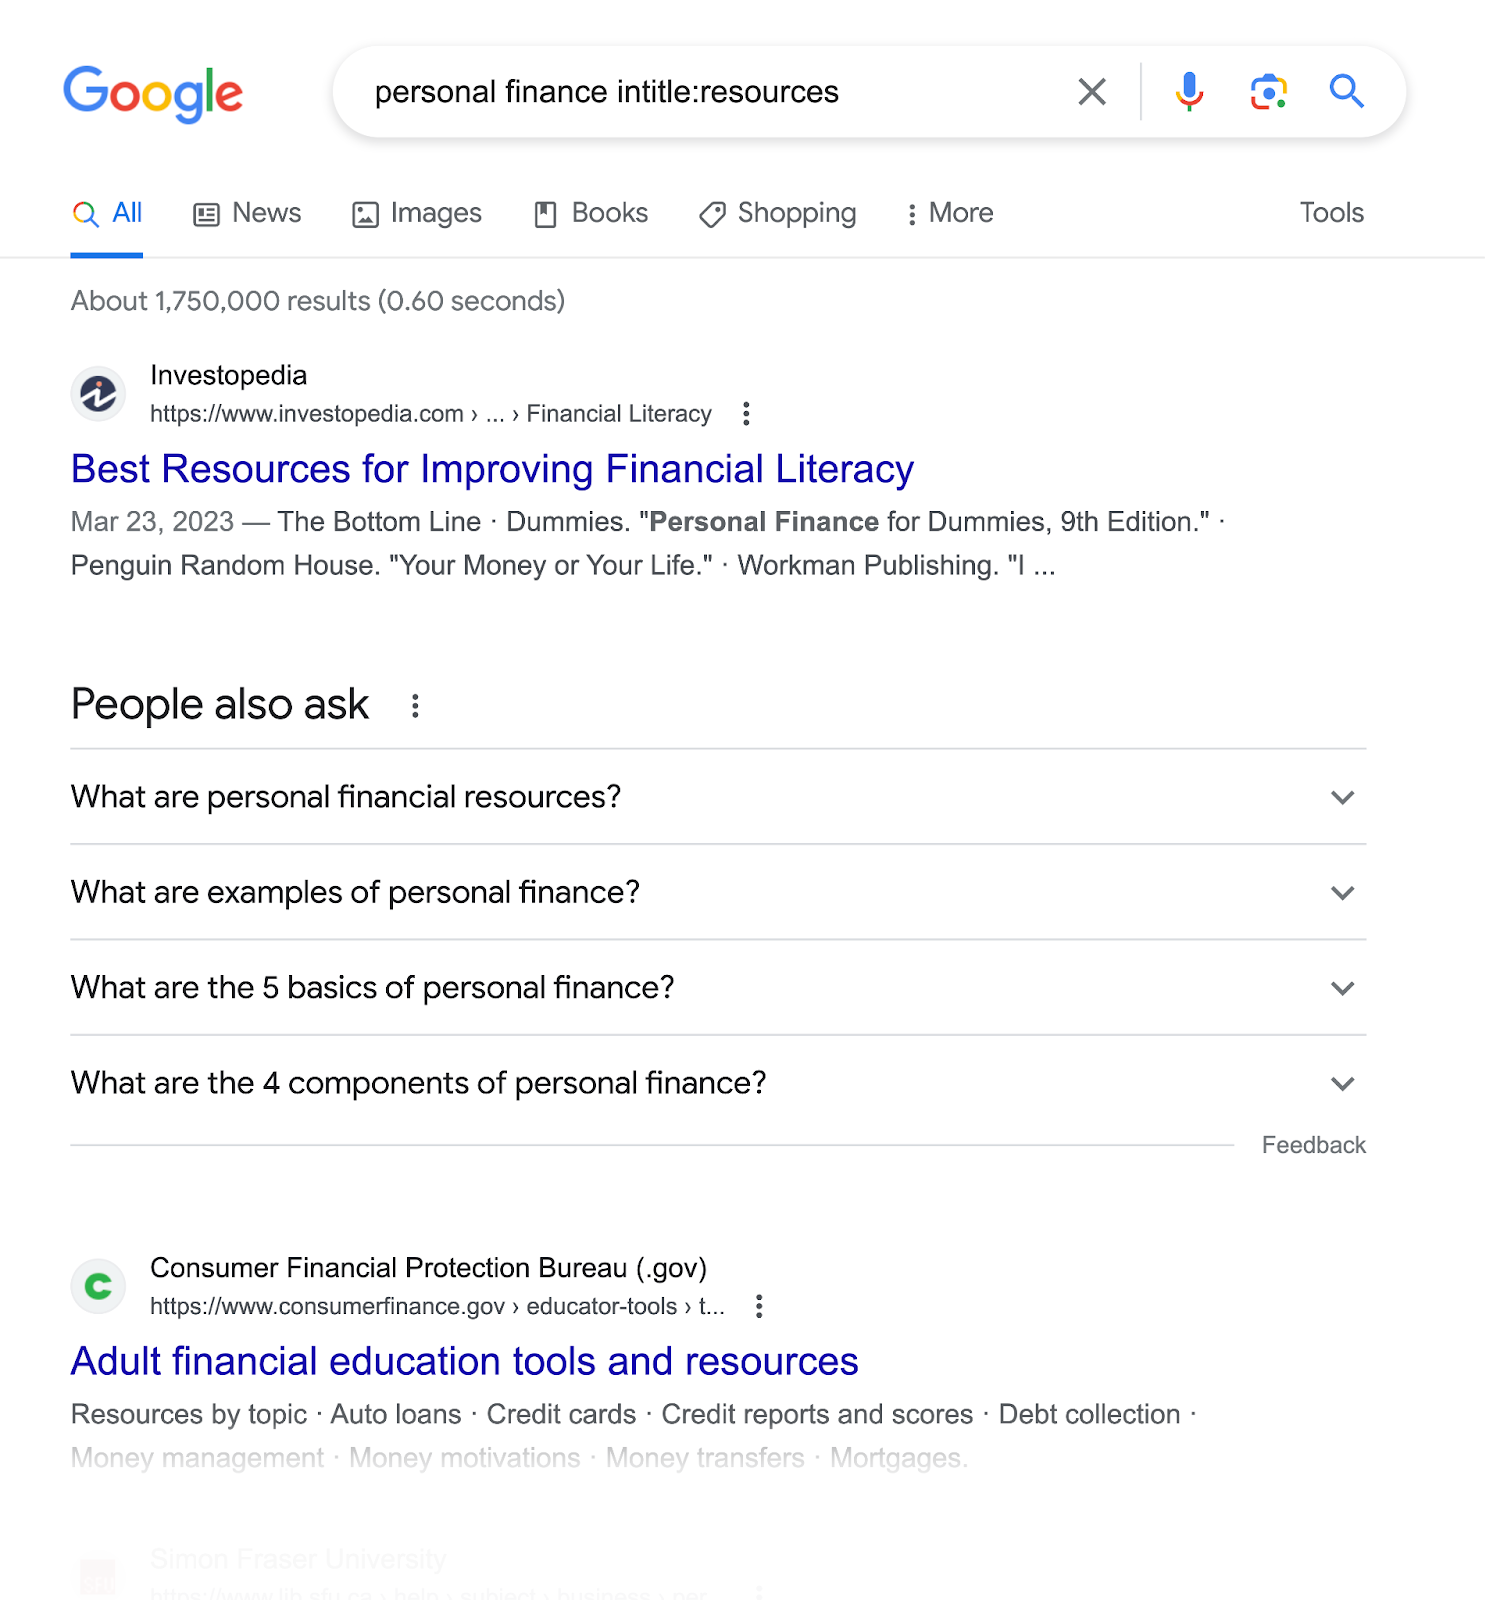 Google search results page for "personal finance intitle:resources"